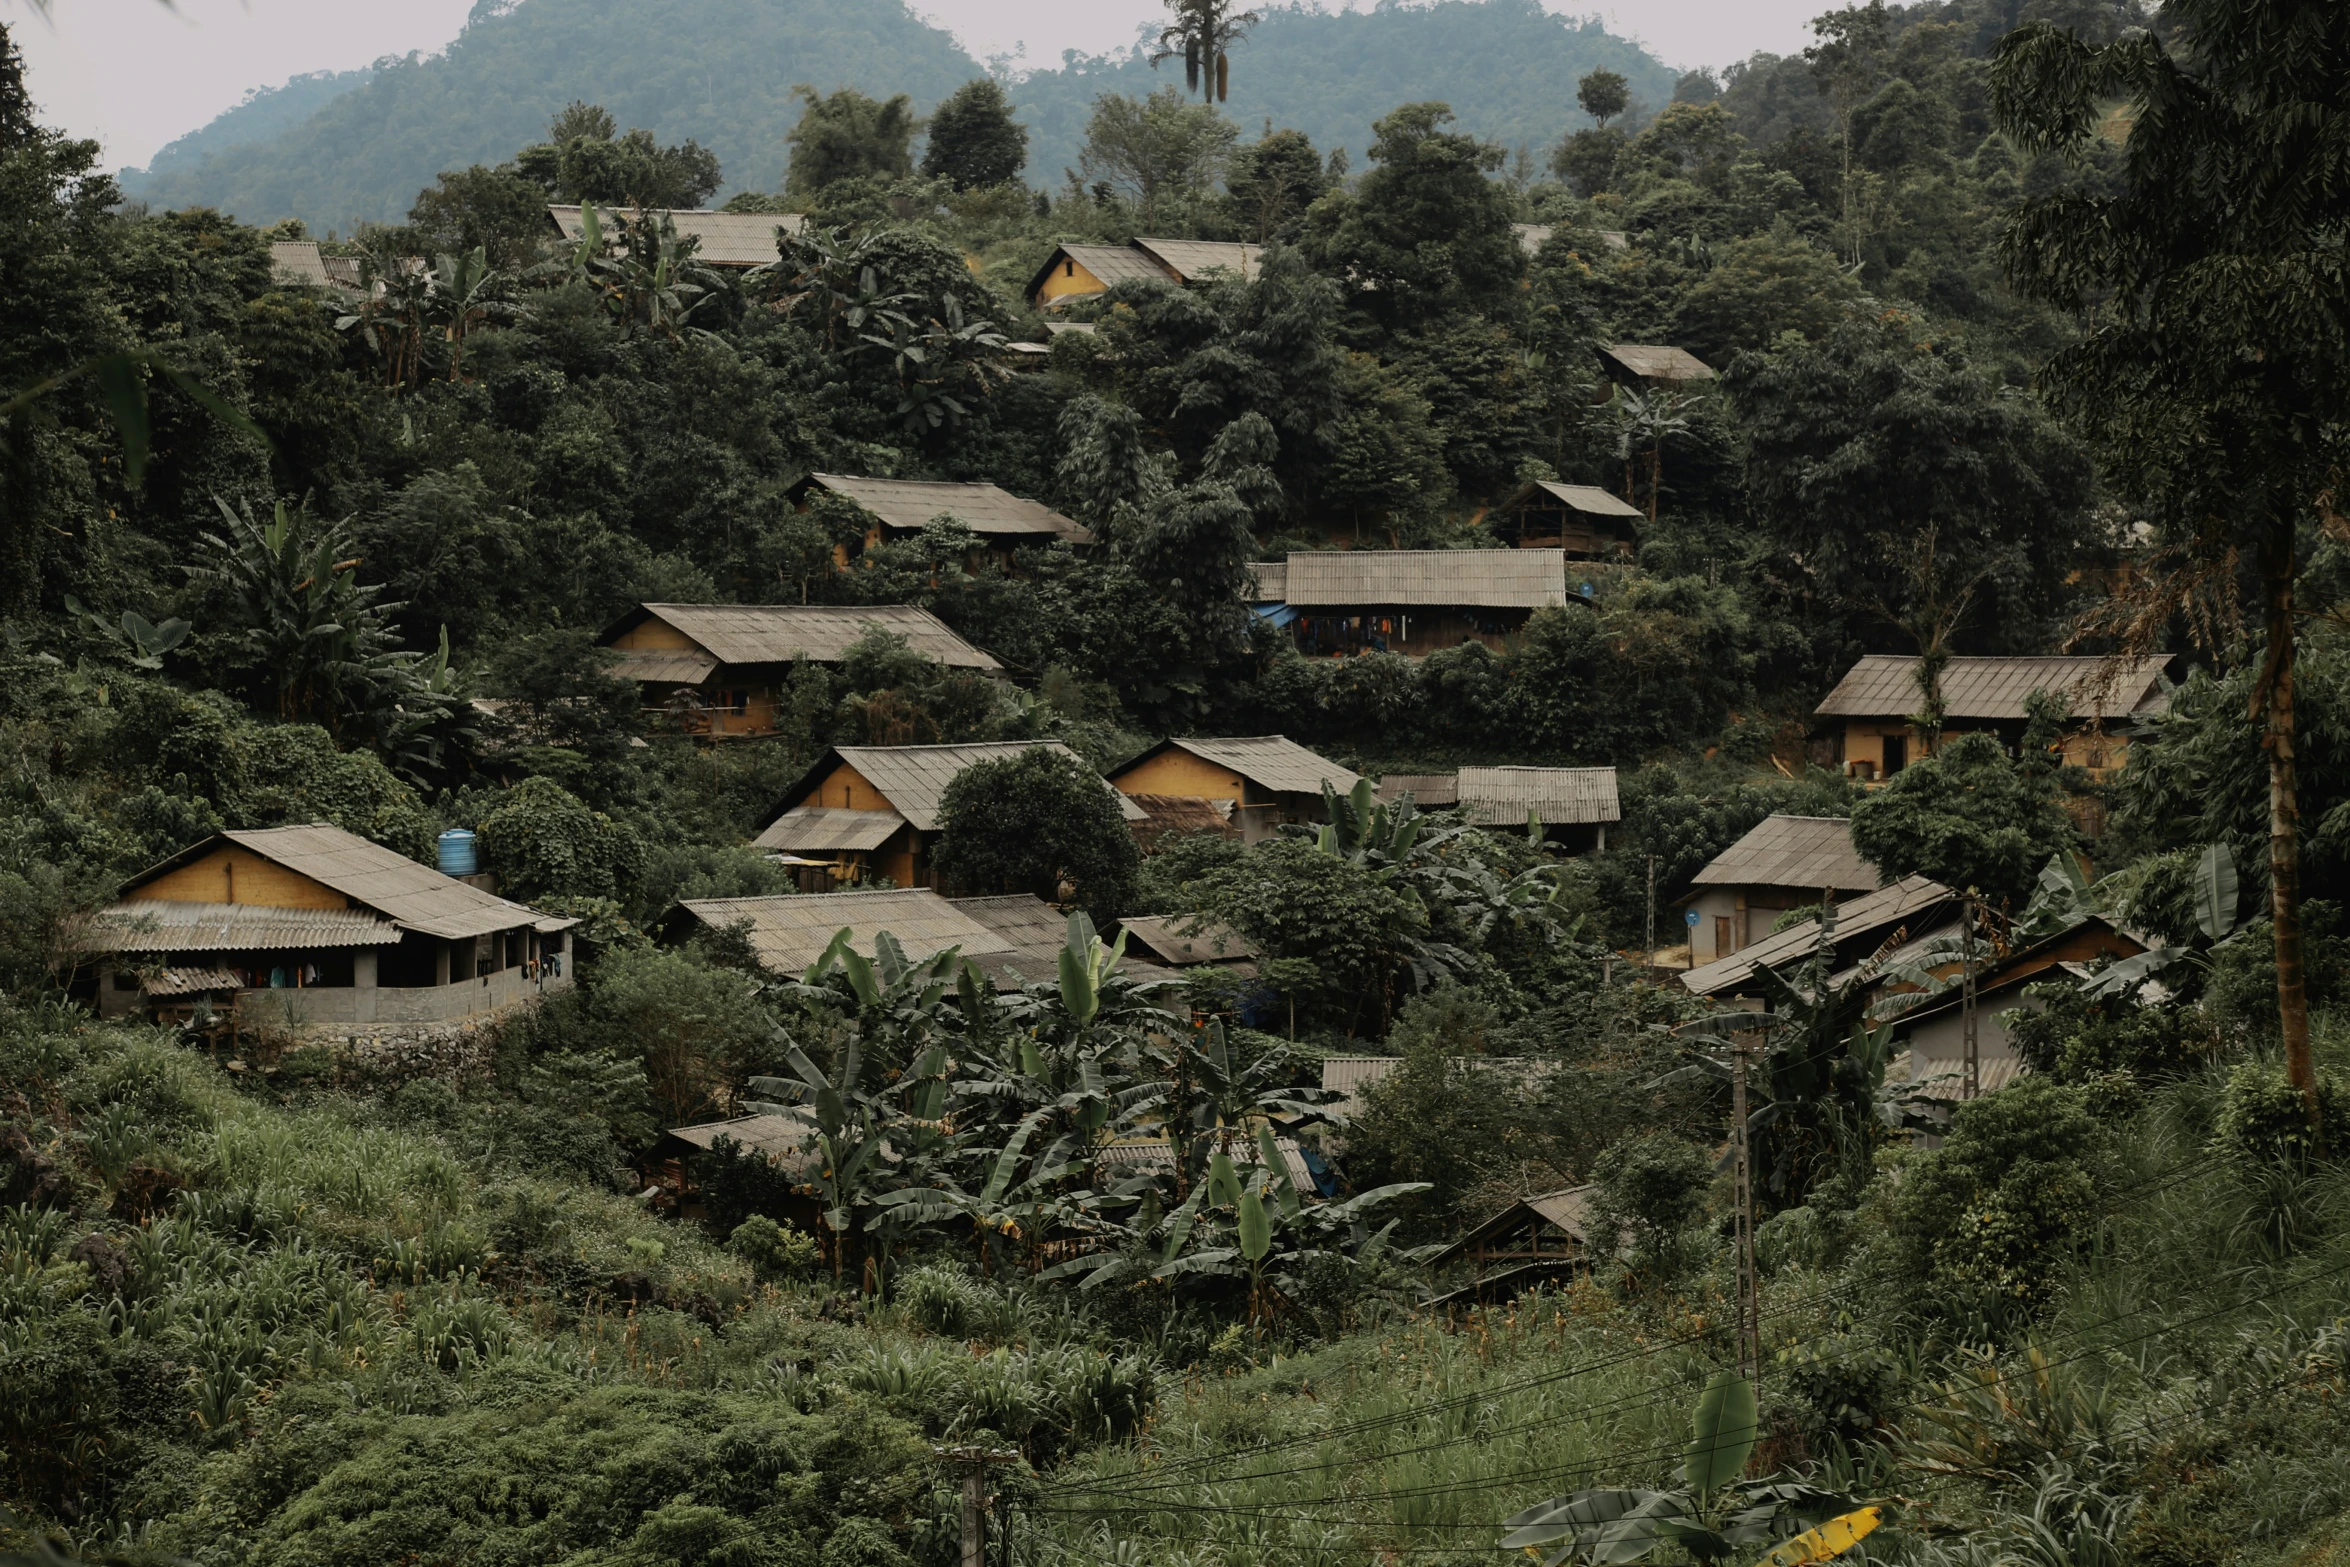 there are many huts surrounded by the forest